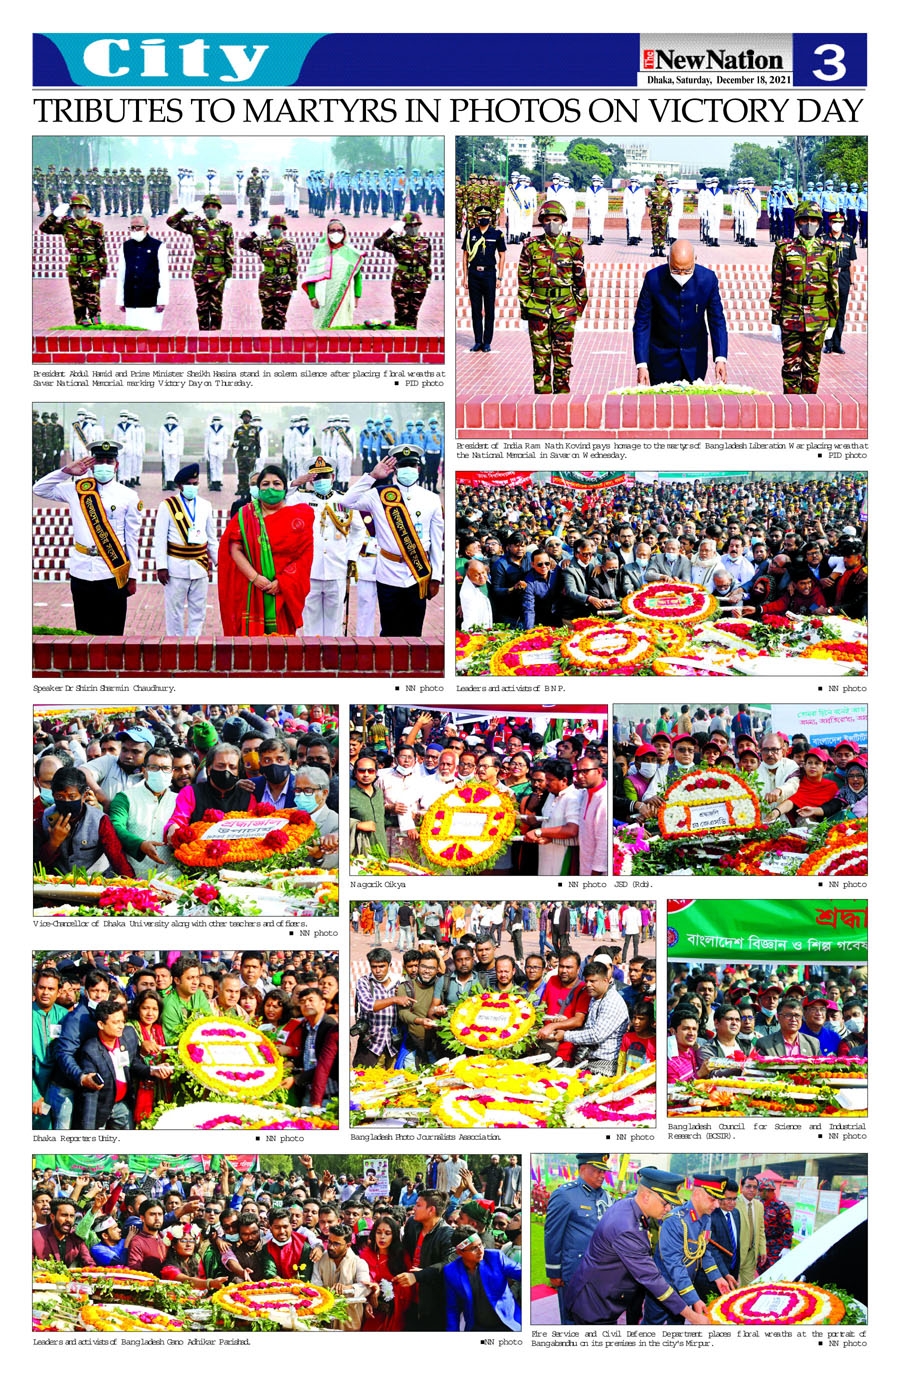 TRIBUTES TO MARTYRS IN PHOTOS ON VICTORY DAY